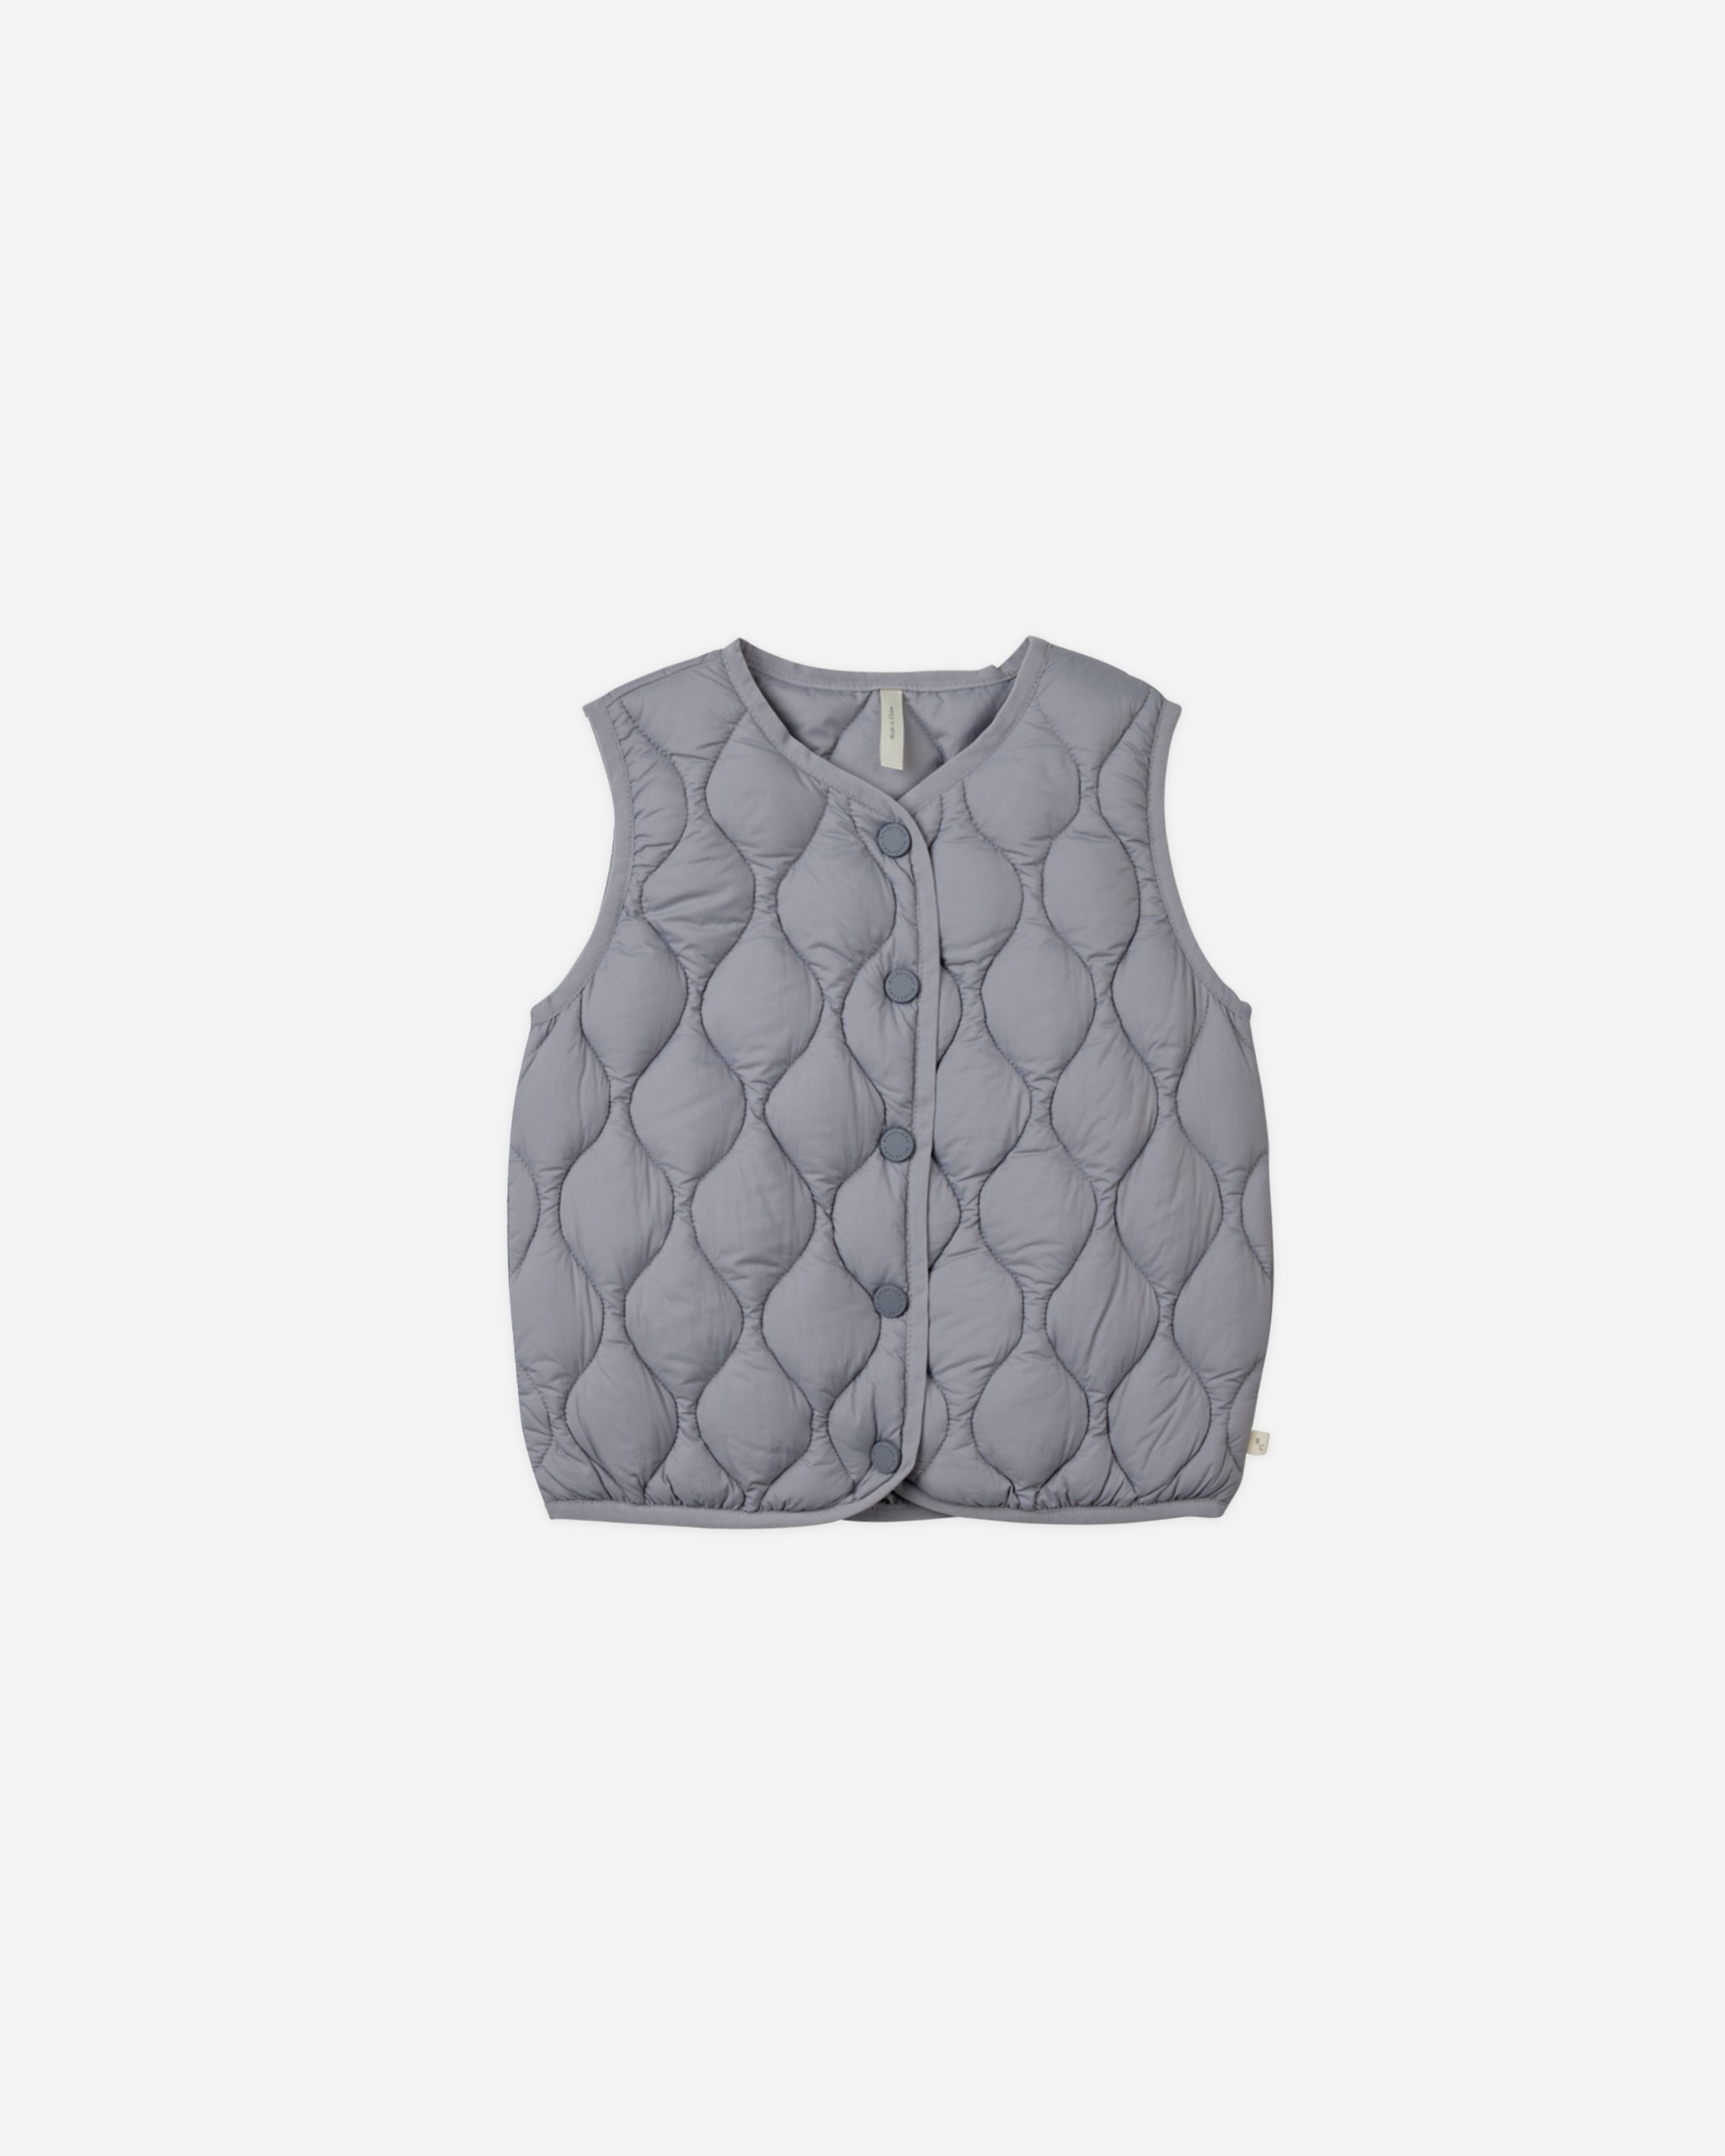 Down Quilted Vest || Dusty Blue - Rylee + Cru | Kids Clothes | Trendy Baby Clothes | Modern Infant Outfits |